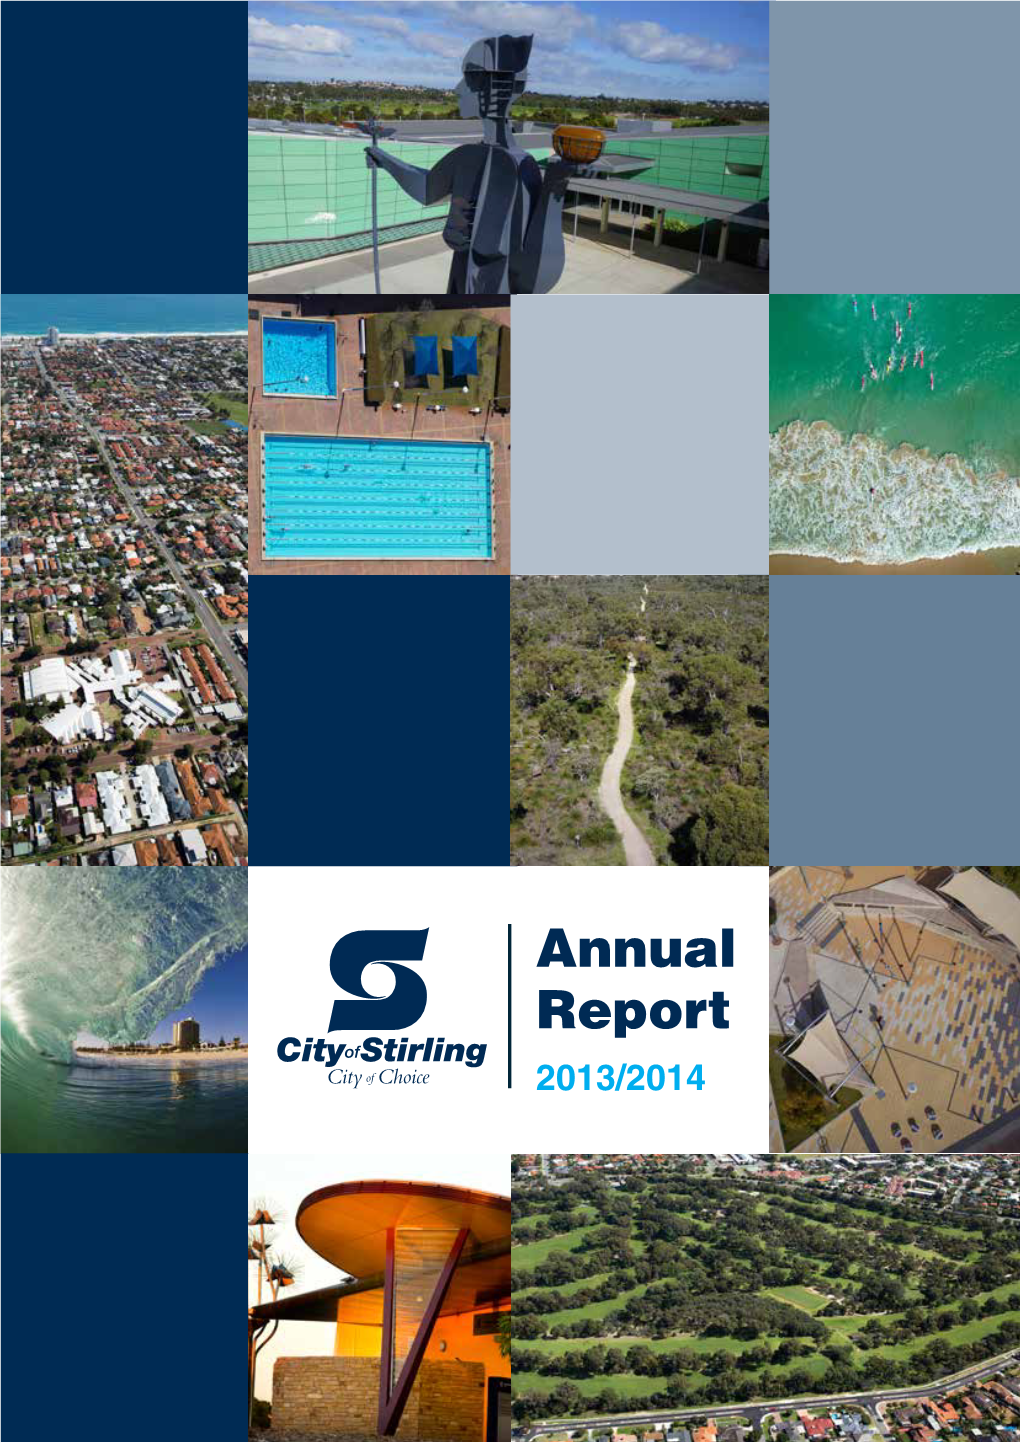 Annual Report 2013/2014 Thank You